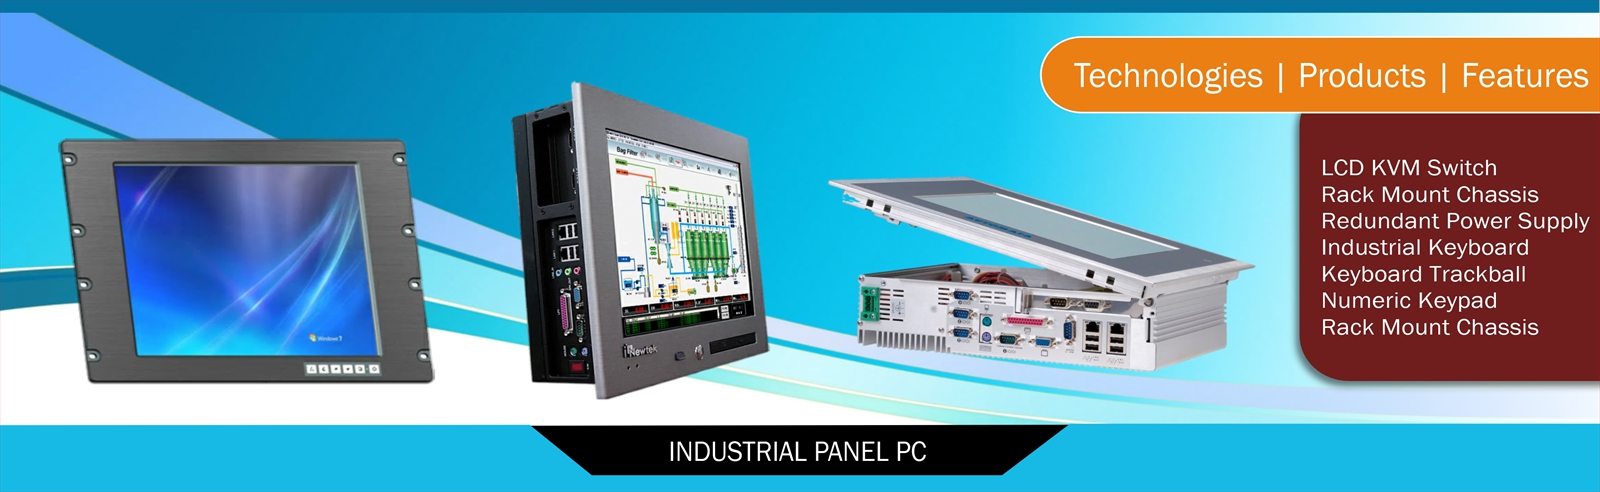 Elpro Technologies Industrial Panel PC